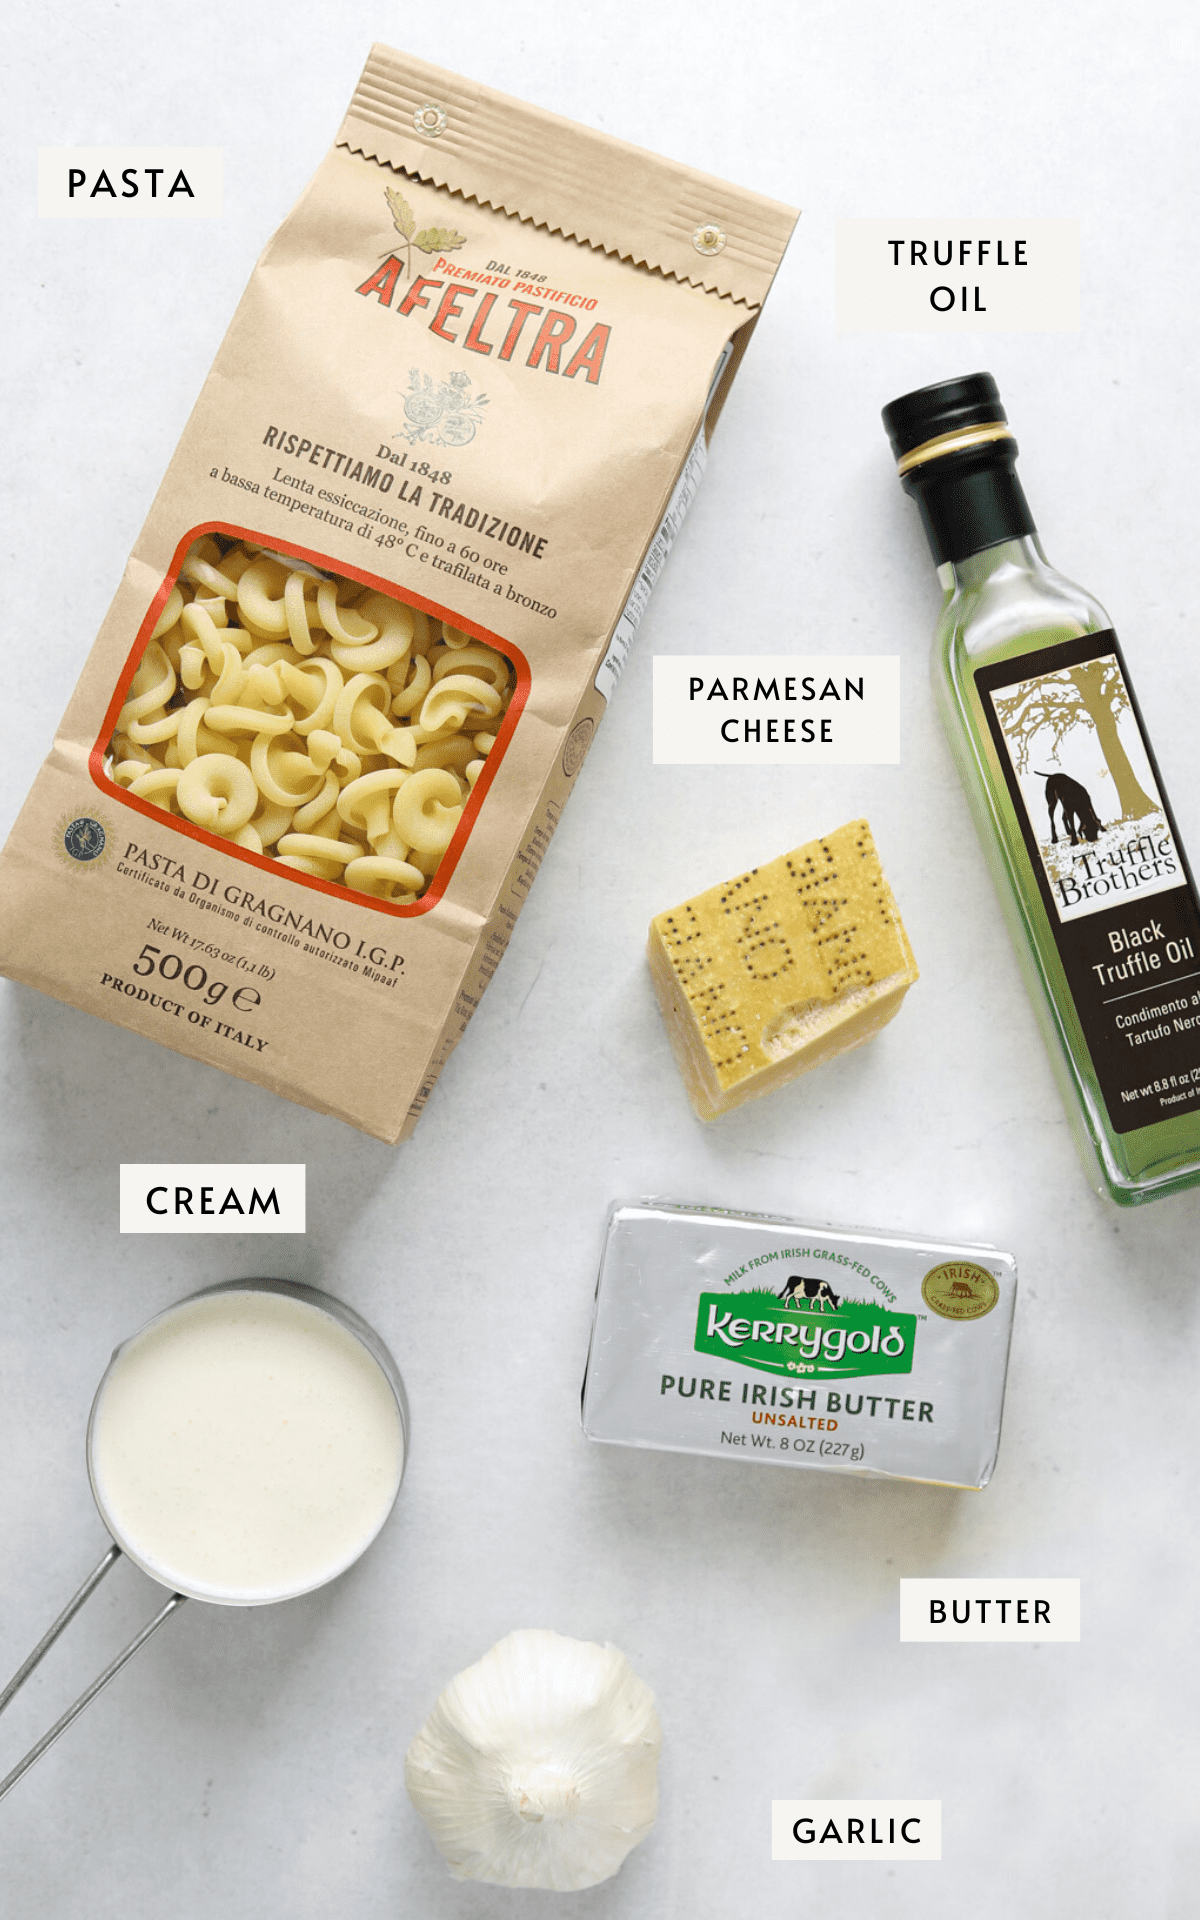 A brown paper bag of pasta, a bottle of black truffle oil, a pack of butter, a hunk of parmesan cheese, a measuring cup filled with cream, one lemon and a head of garlic all on a light blue-gray background.